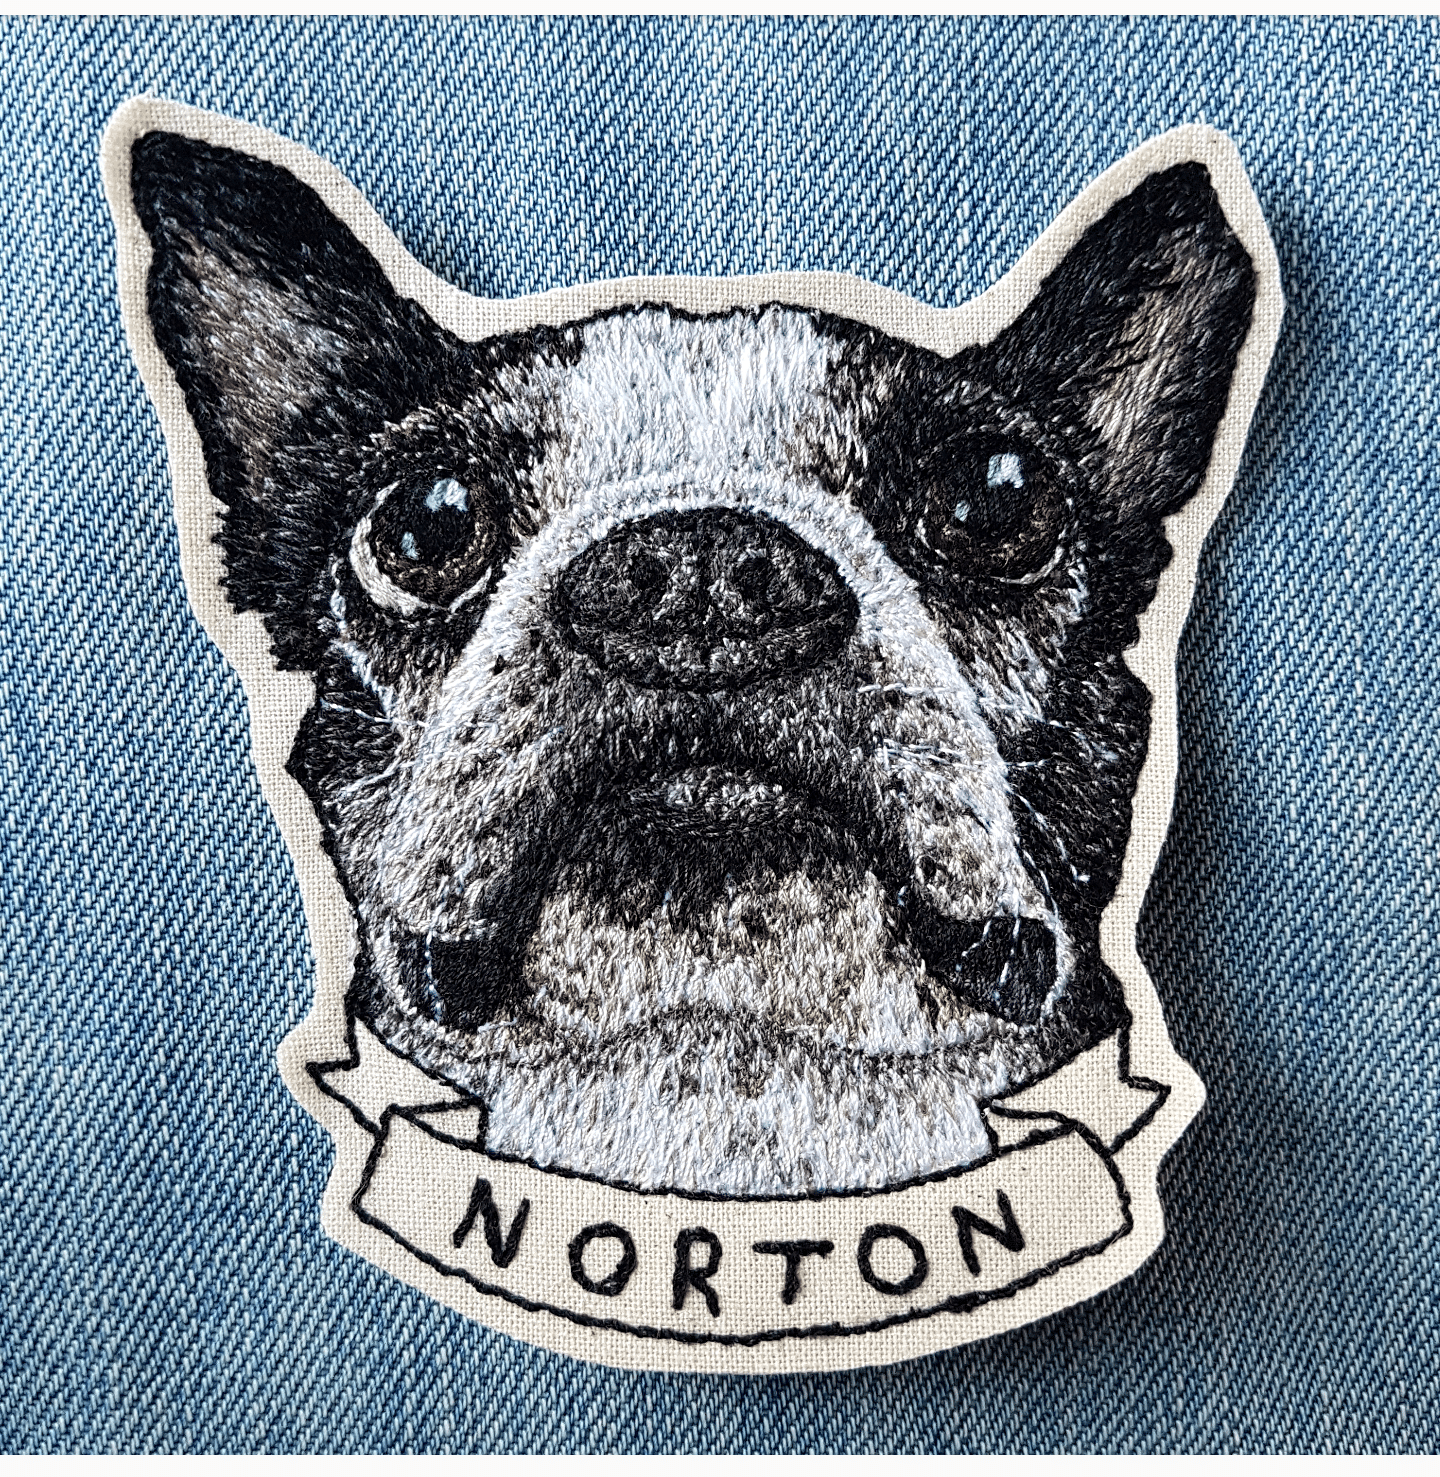 [SINGLE]: Custom Embroidered Pet Portrait Patch/Brooch